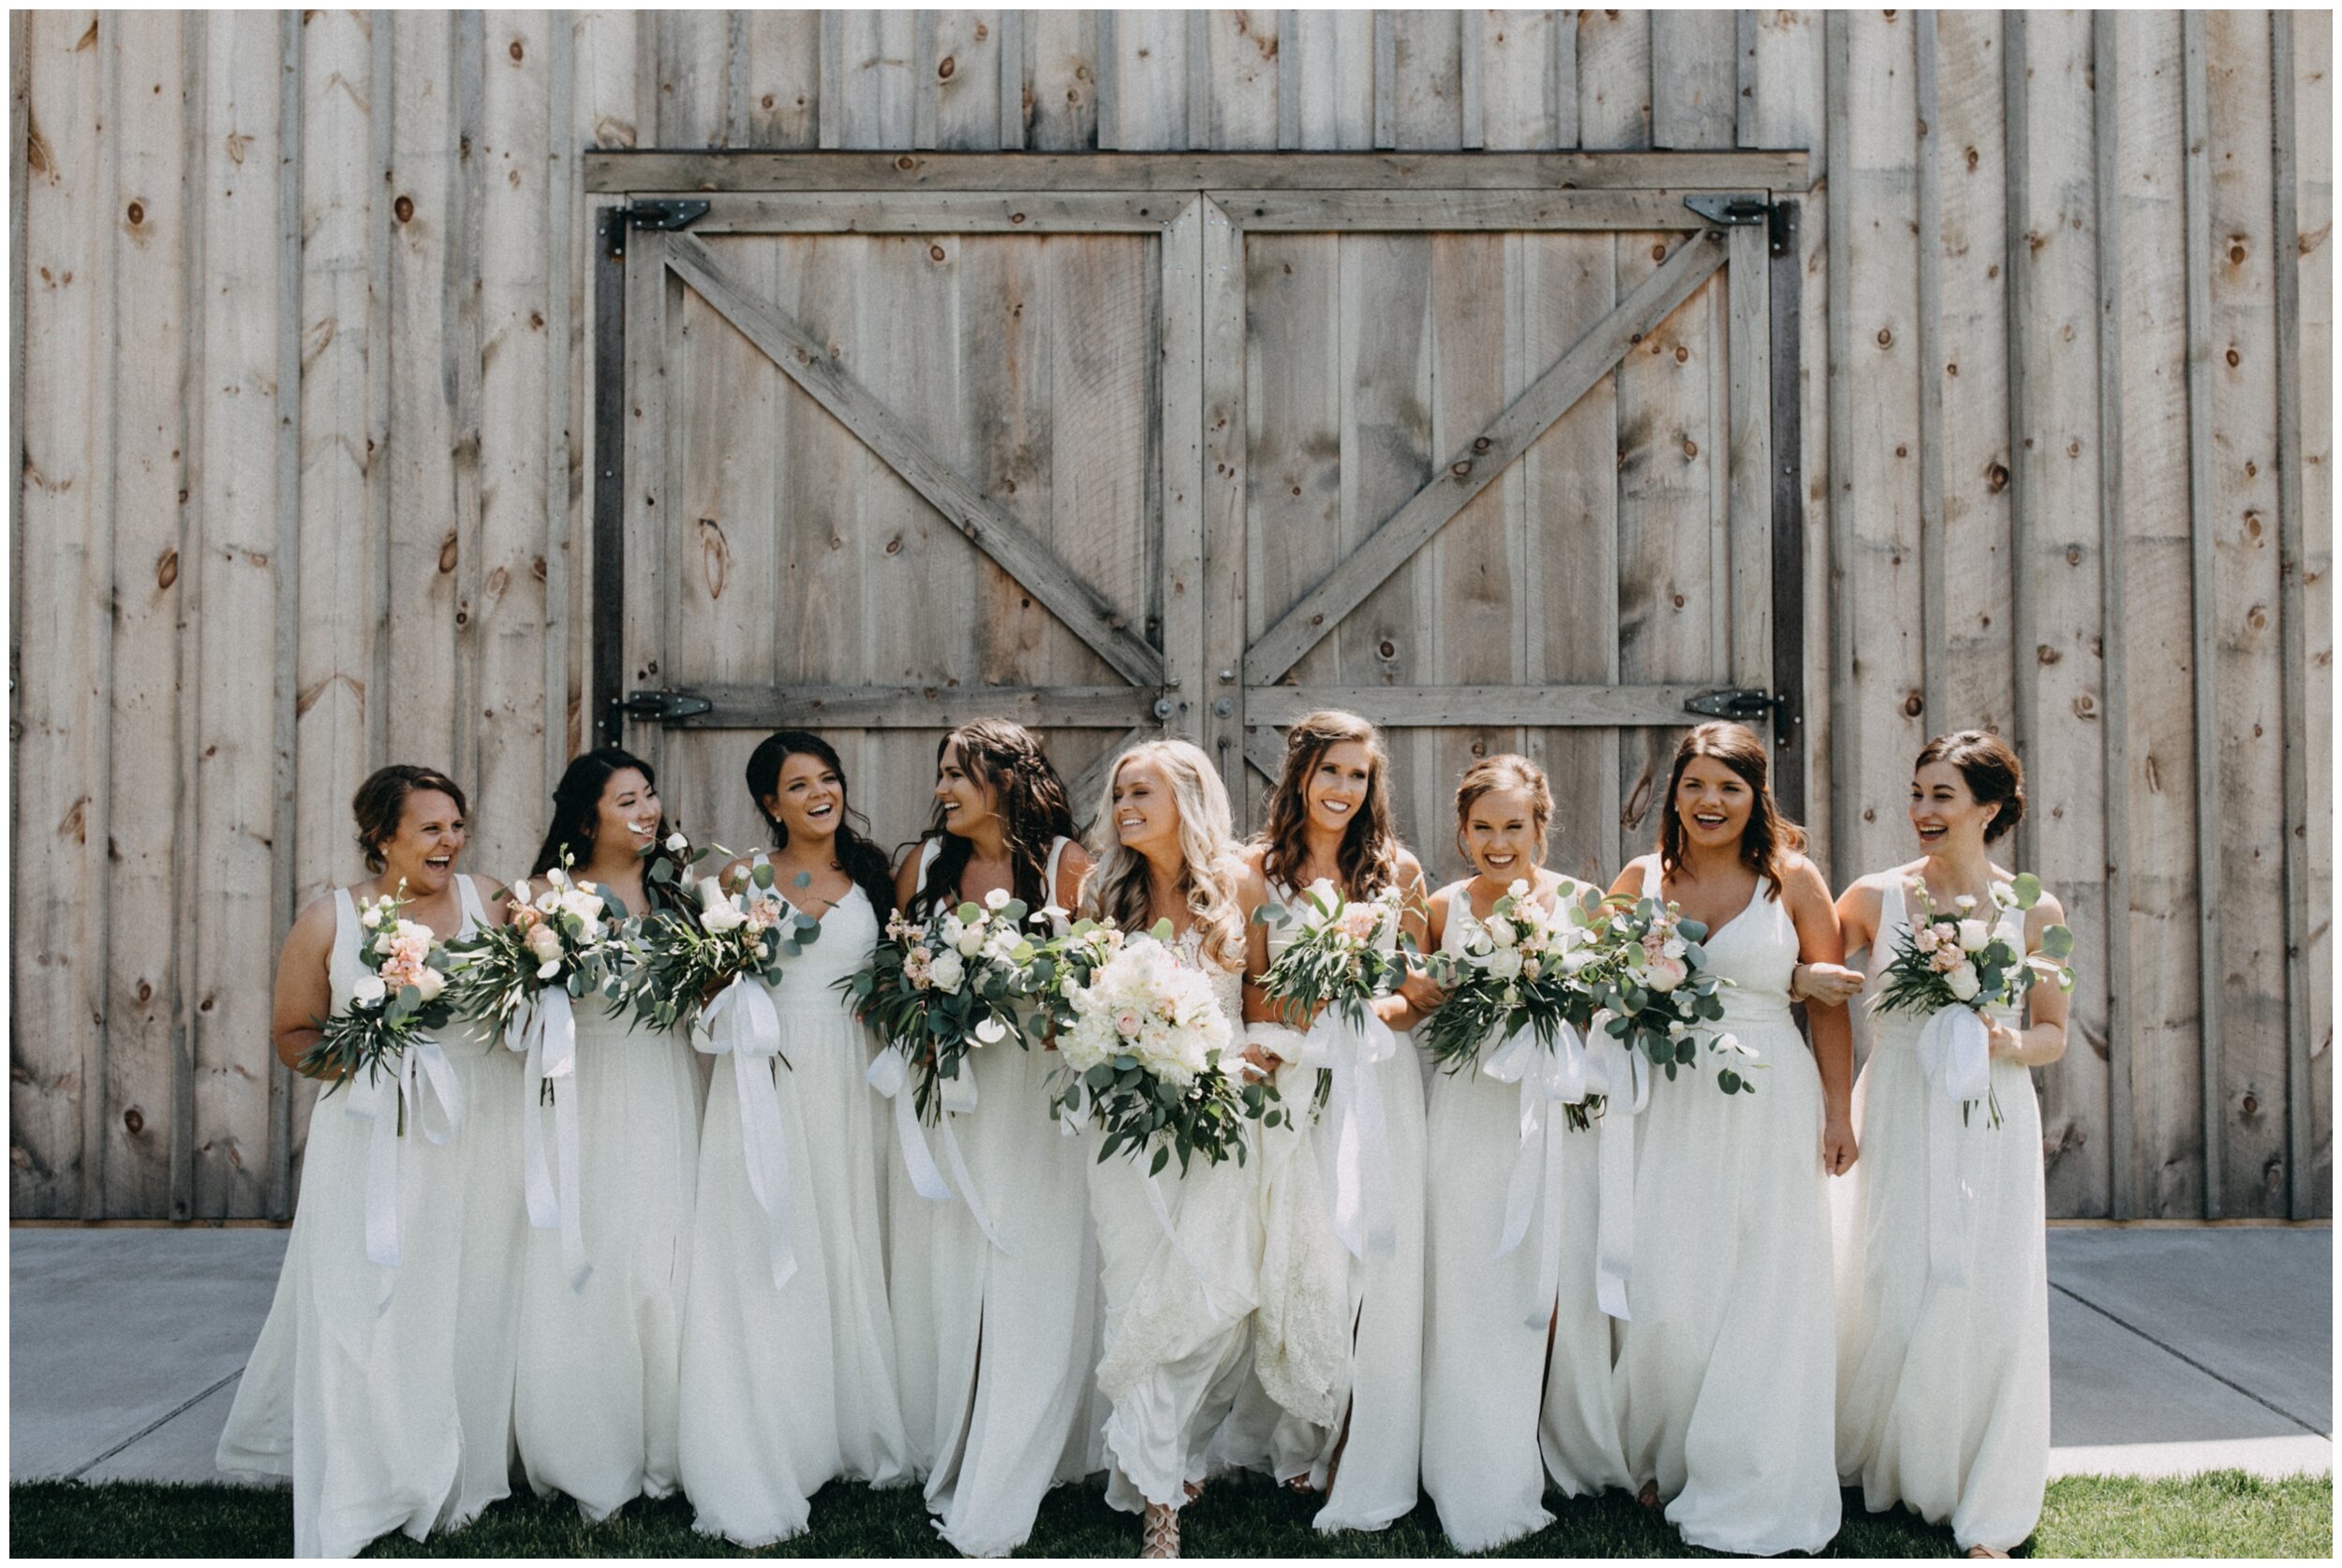 Bridesmaids wearing white dresses walking with bride outside barn at Creekside Farm in Rush City, Minnesota